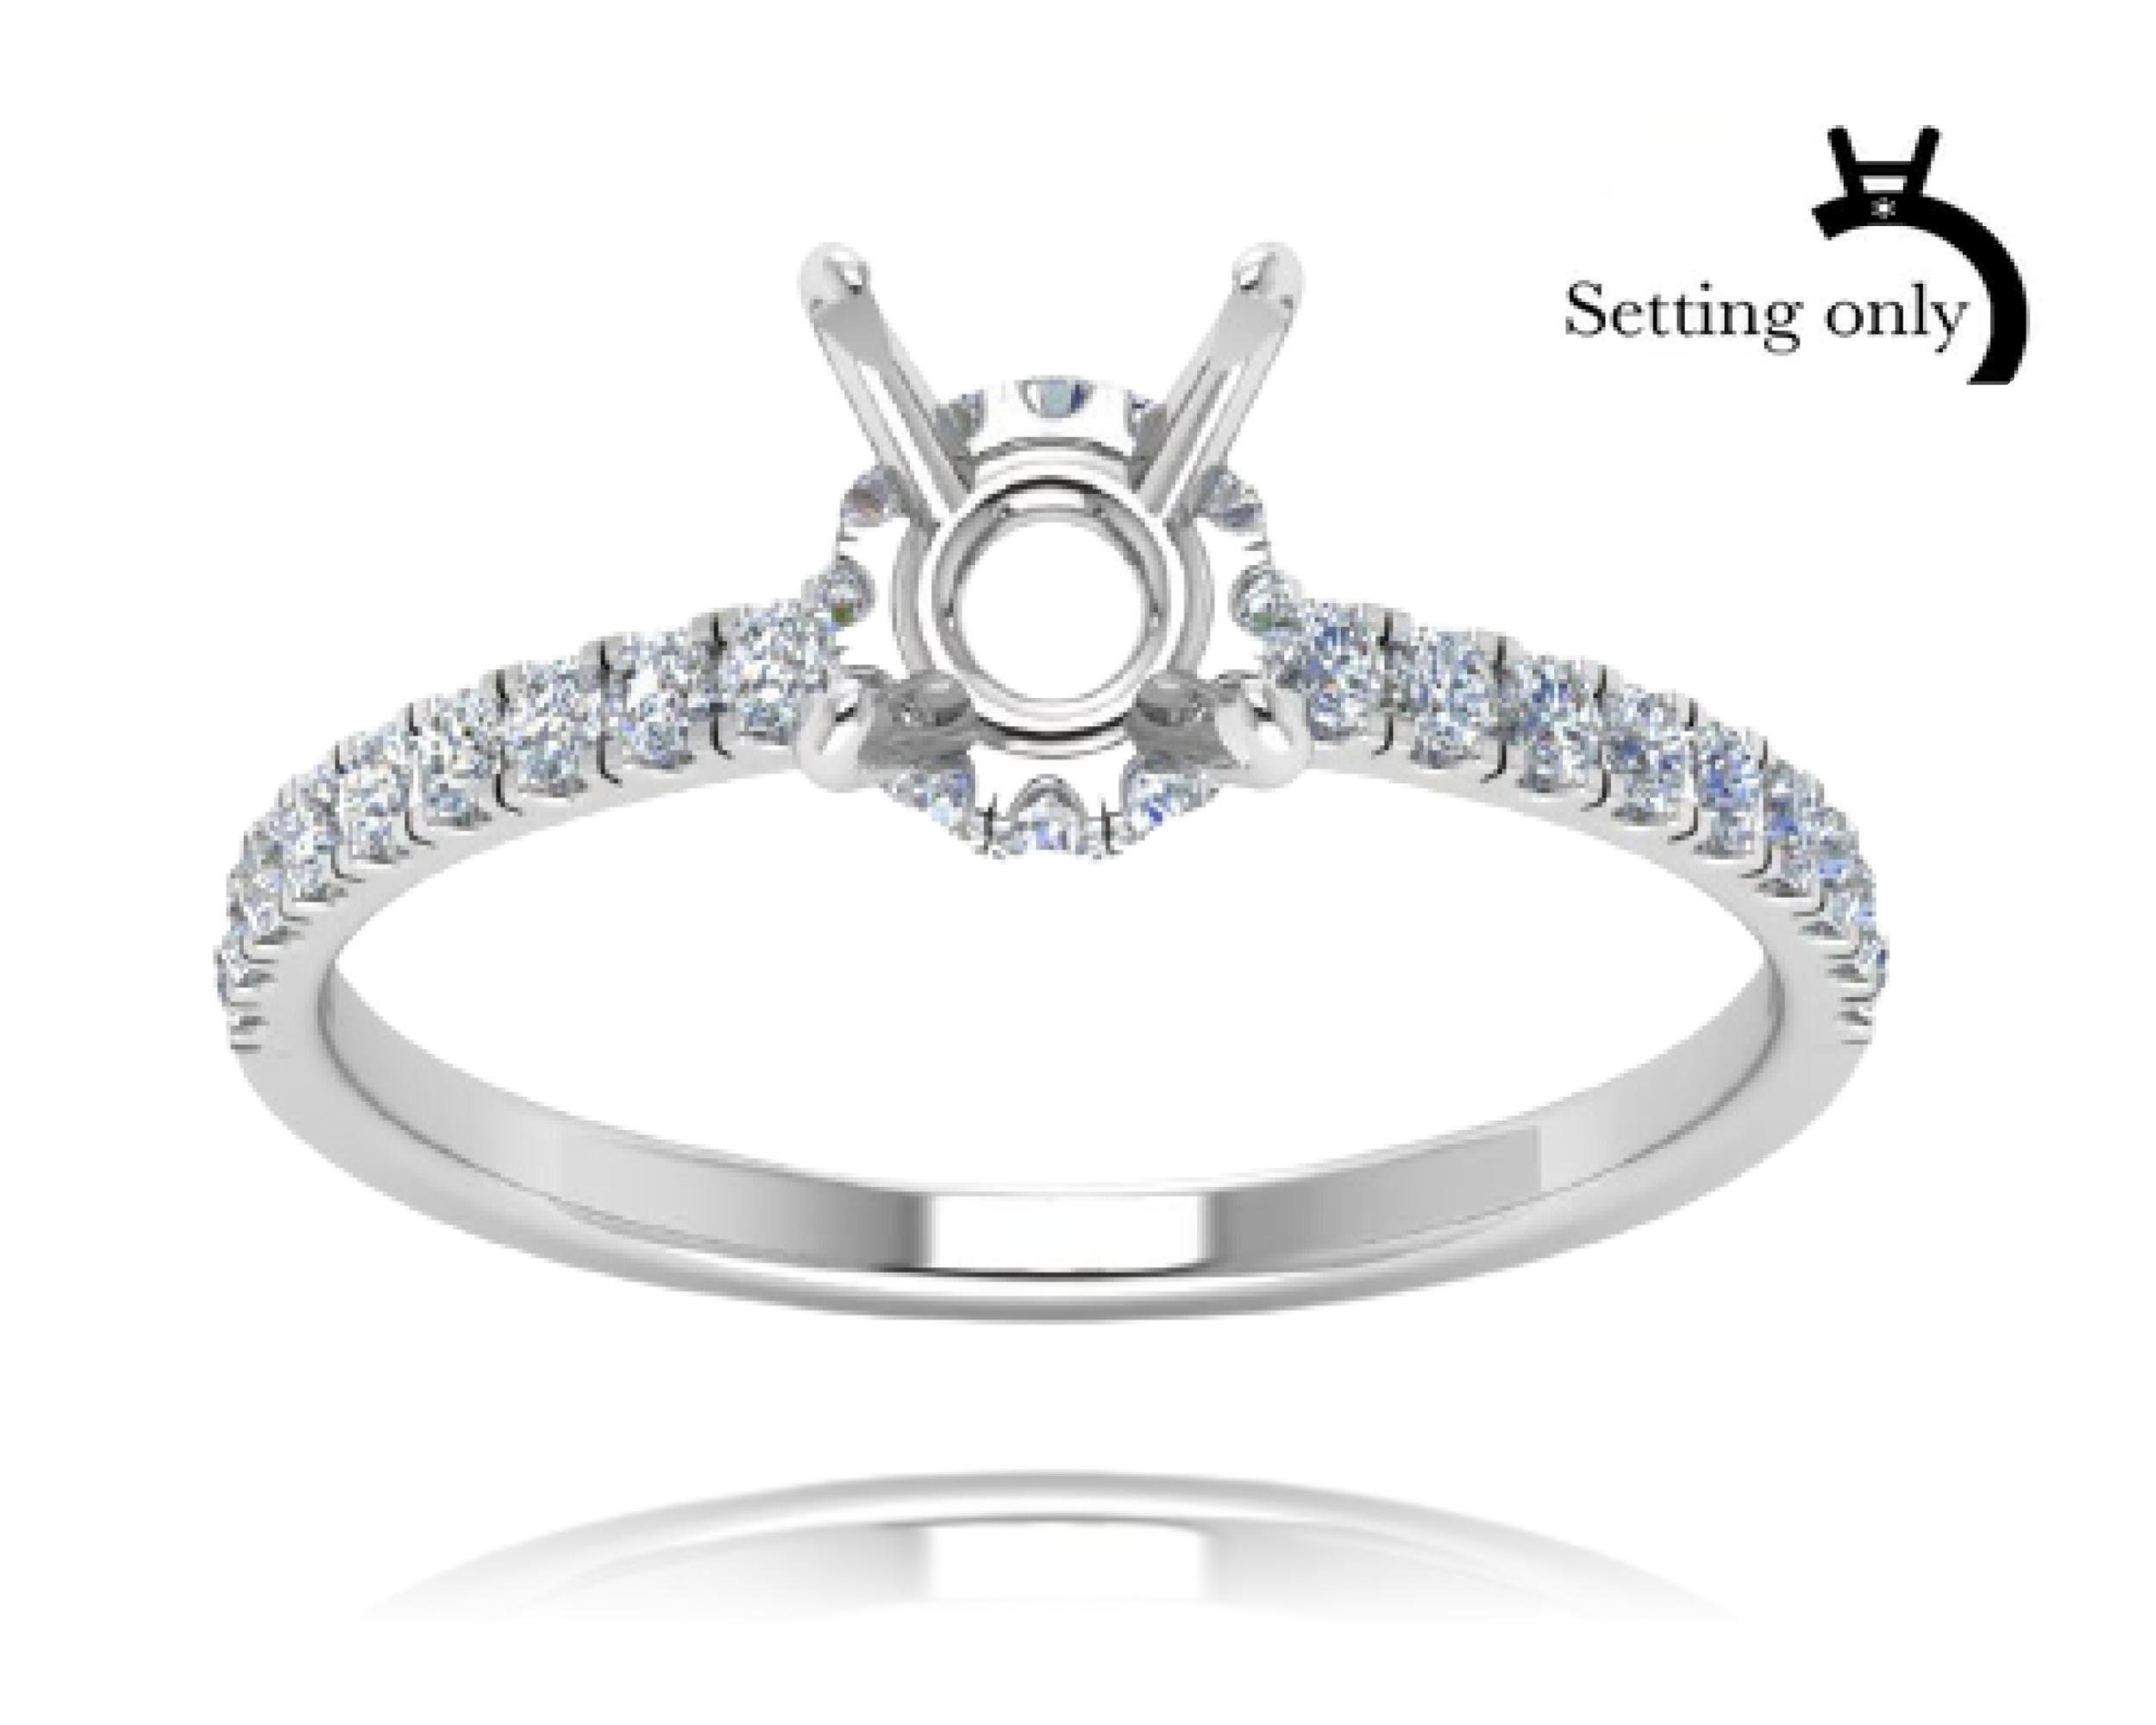 14k White Gold Princess Cut Diamond Solitaire Engagement Ring (Setting Only)